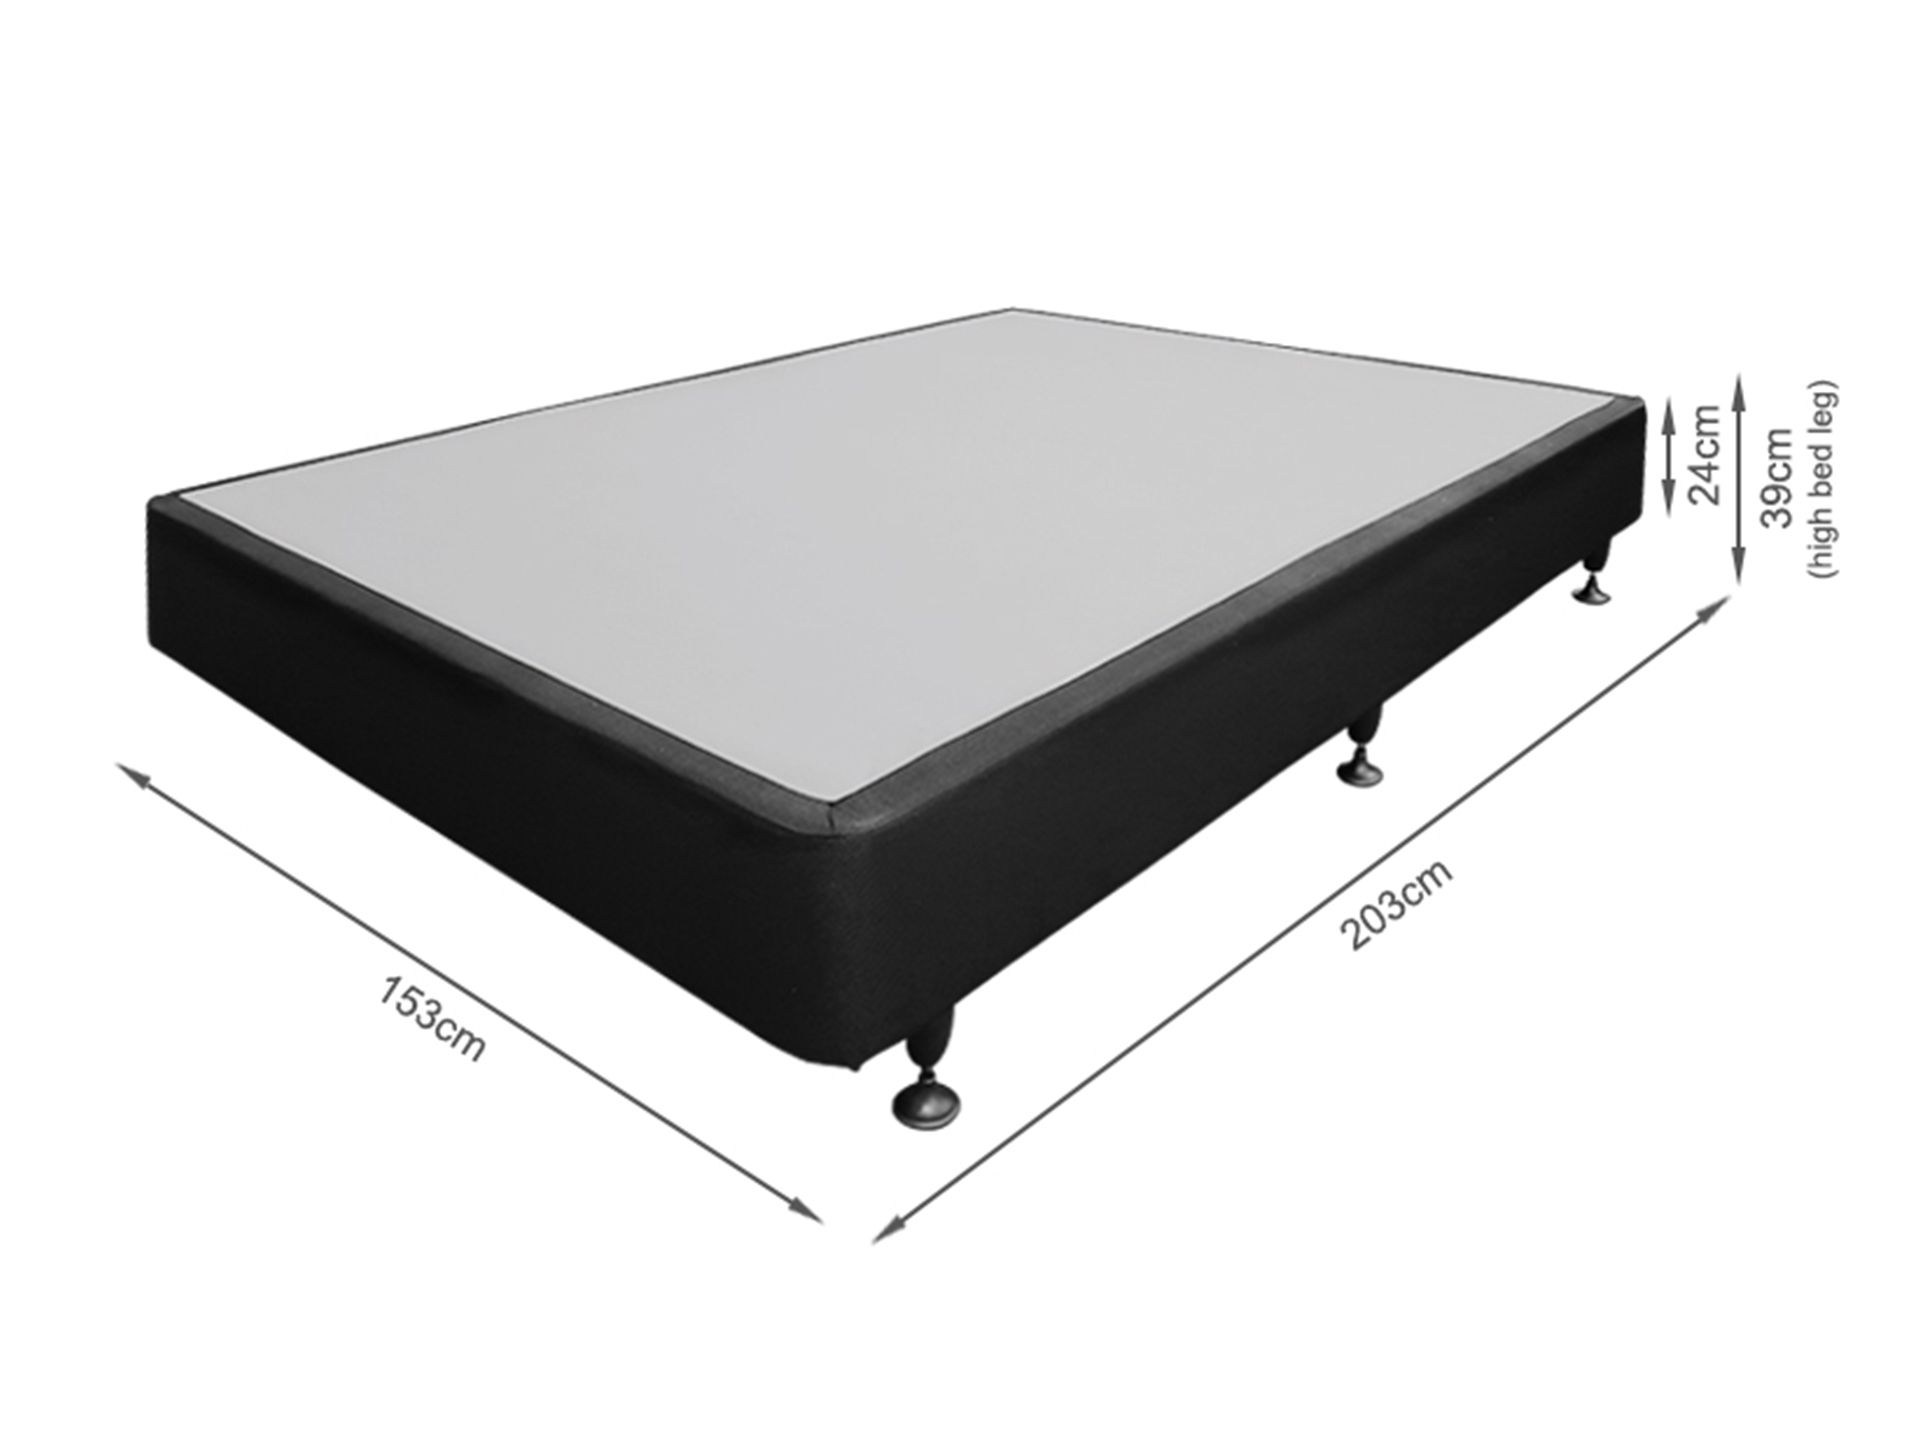 Vinson Fabric Queen Bed with Premier Back Support Mattress - Black